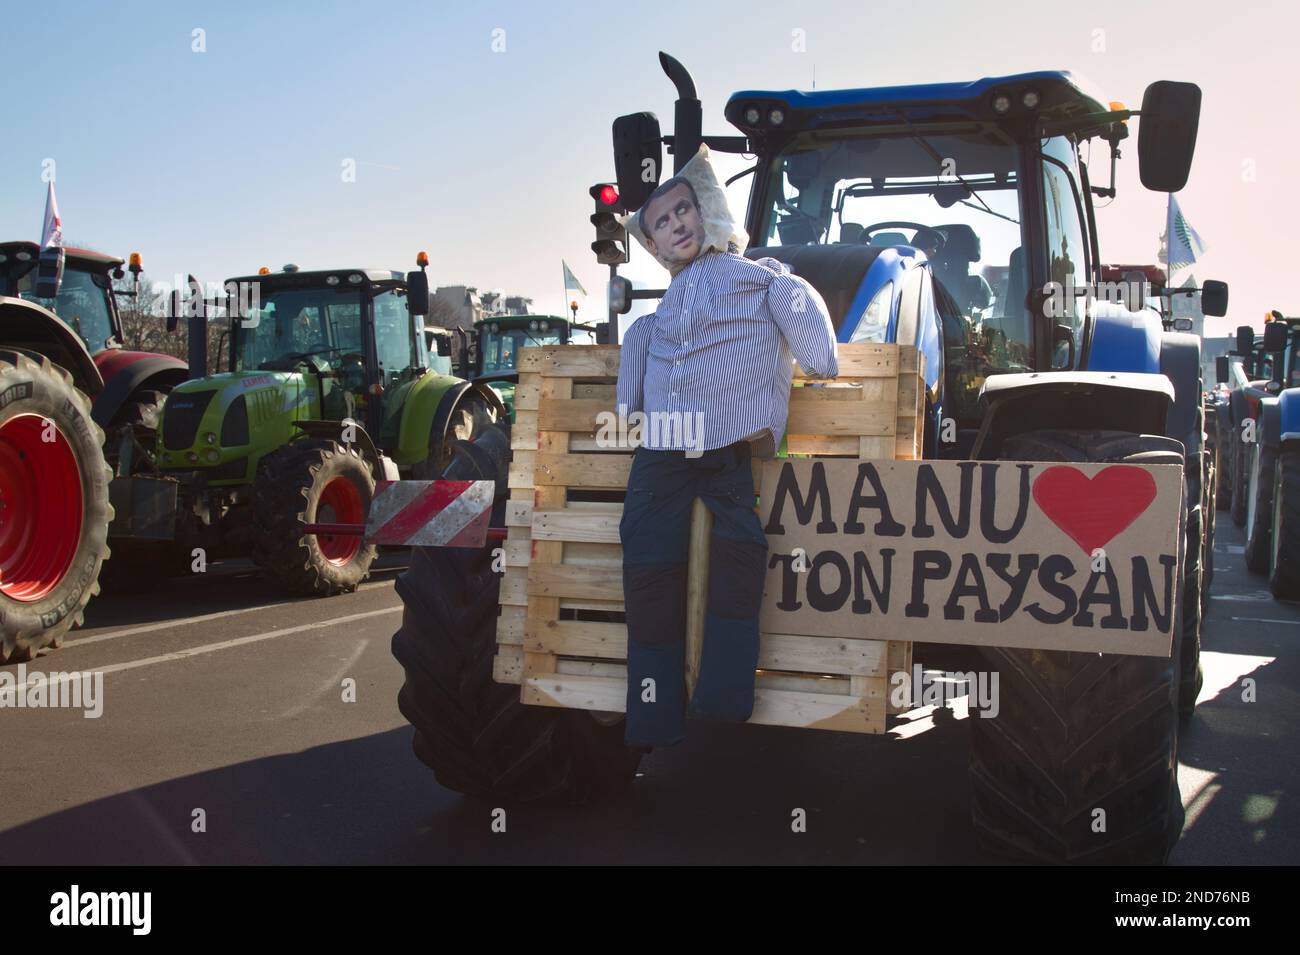 A Mannequin, Scarecrow Of Emmanuel Macron, French President Fixed To The Front Of A Tractor During The French Farmers Protest Against The French Government, Paris, 8th Feb 2023 Stock Photo